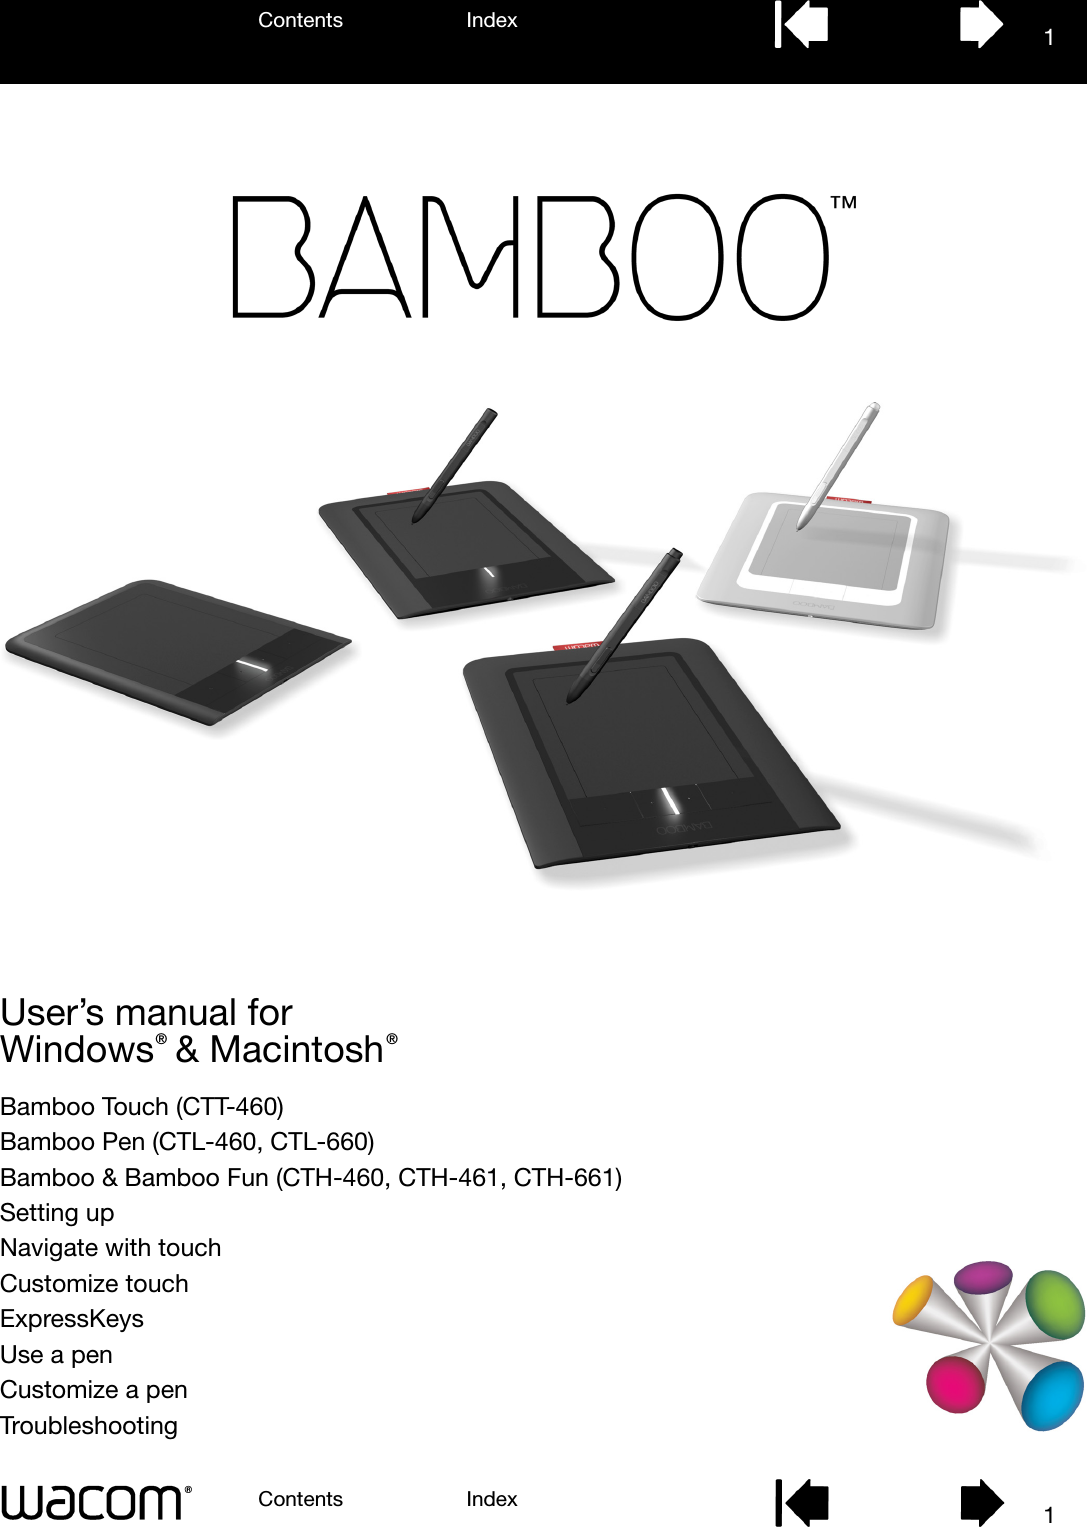 User’s manual for Windows  &amp; Macintosh®®Bamboo Touch (CTT-460)Bamboo Pen (CTL-460, CTL-660)Bamboo &amp; Bamboo Fun (CTH-460, CTH-461, CTH-661)Setting upNavigate with touchCustomize touchExpressKeysUse a penCustomize a penTroubleshootingContents IndexContents 1Index1